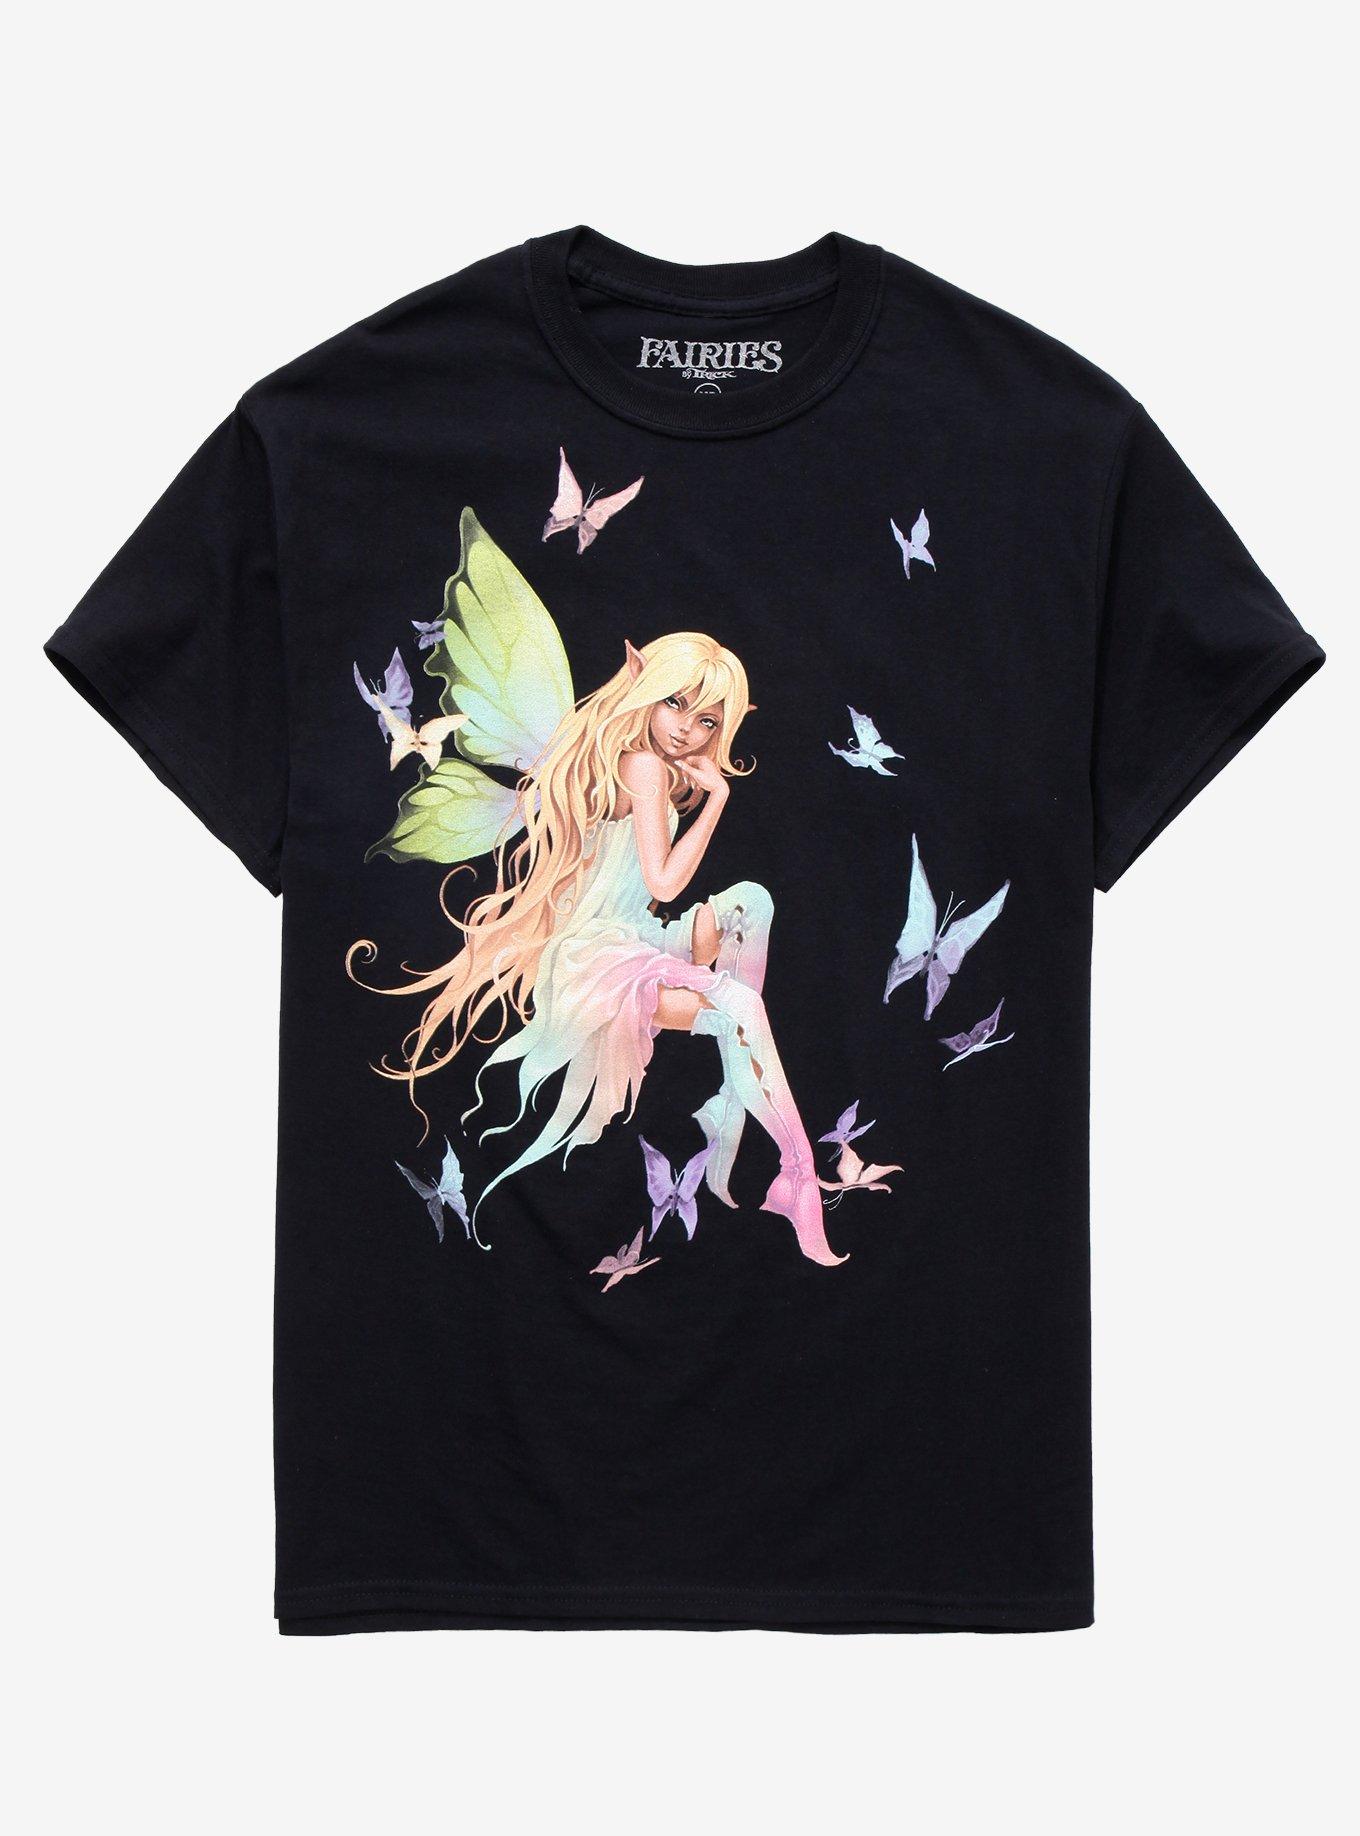 Fairies By Hot Butterfly Fit Pastel Fairy Topic T-Shirt Girls Boyfriend | Trick